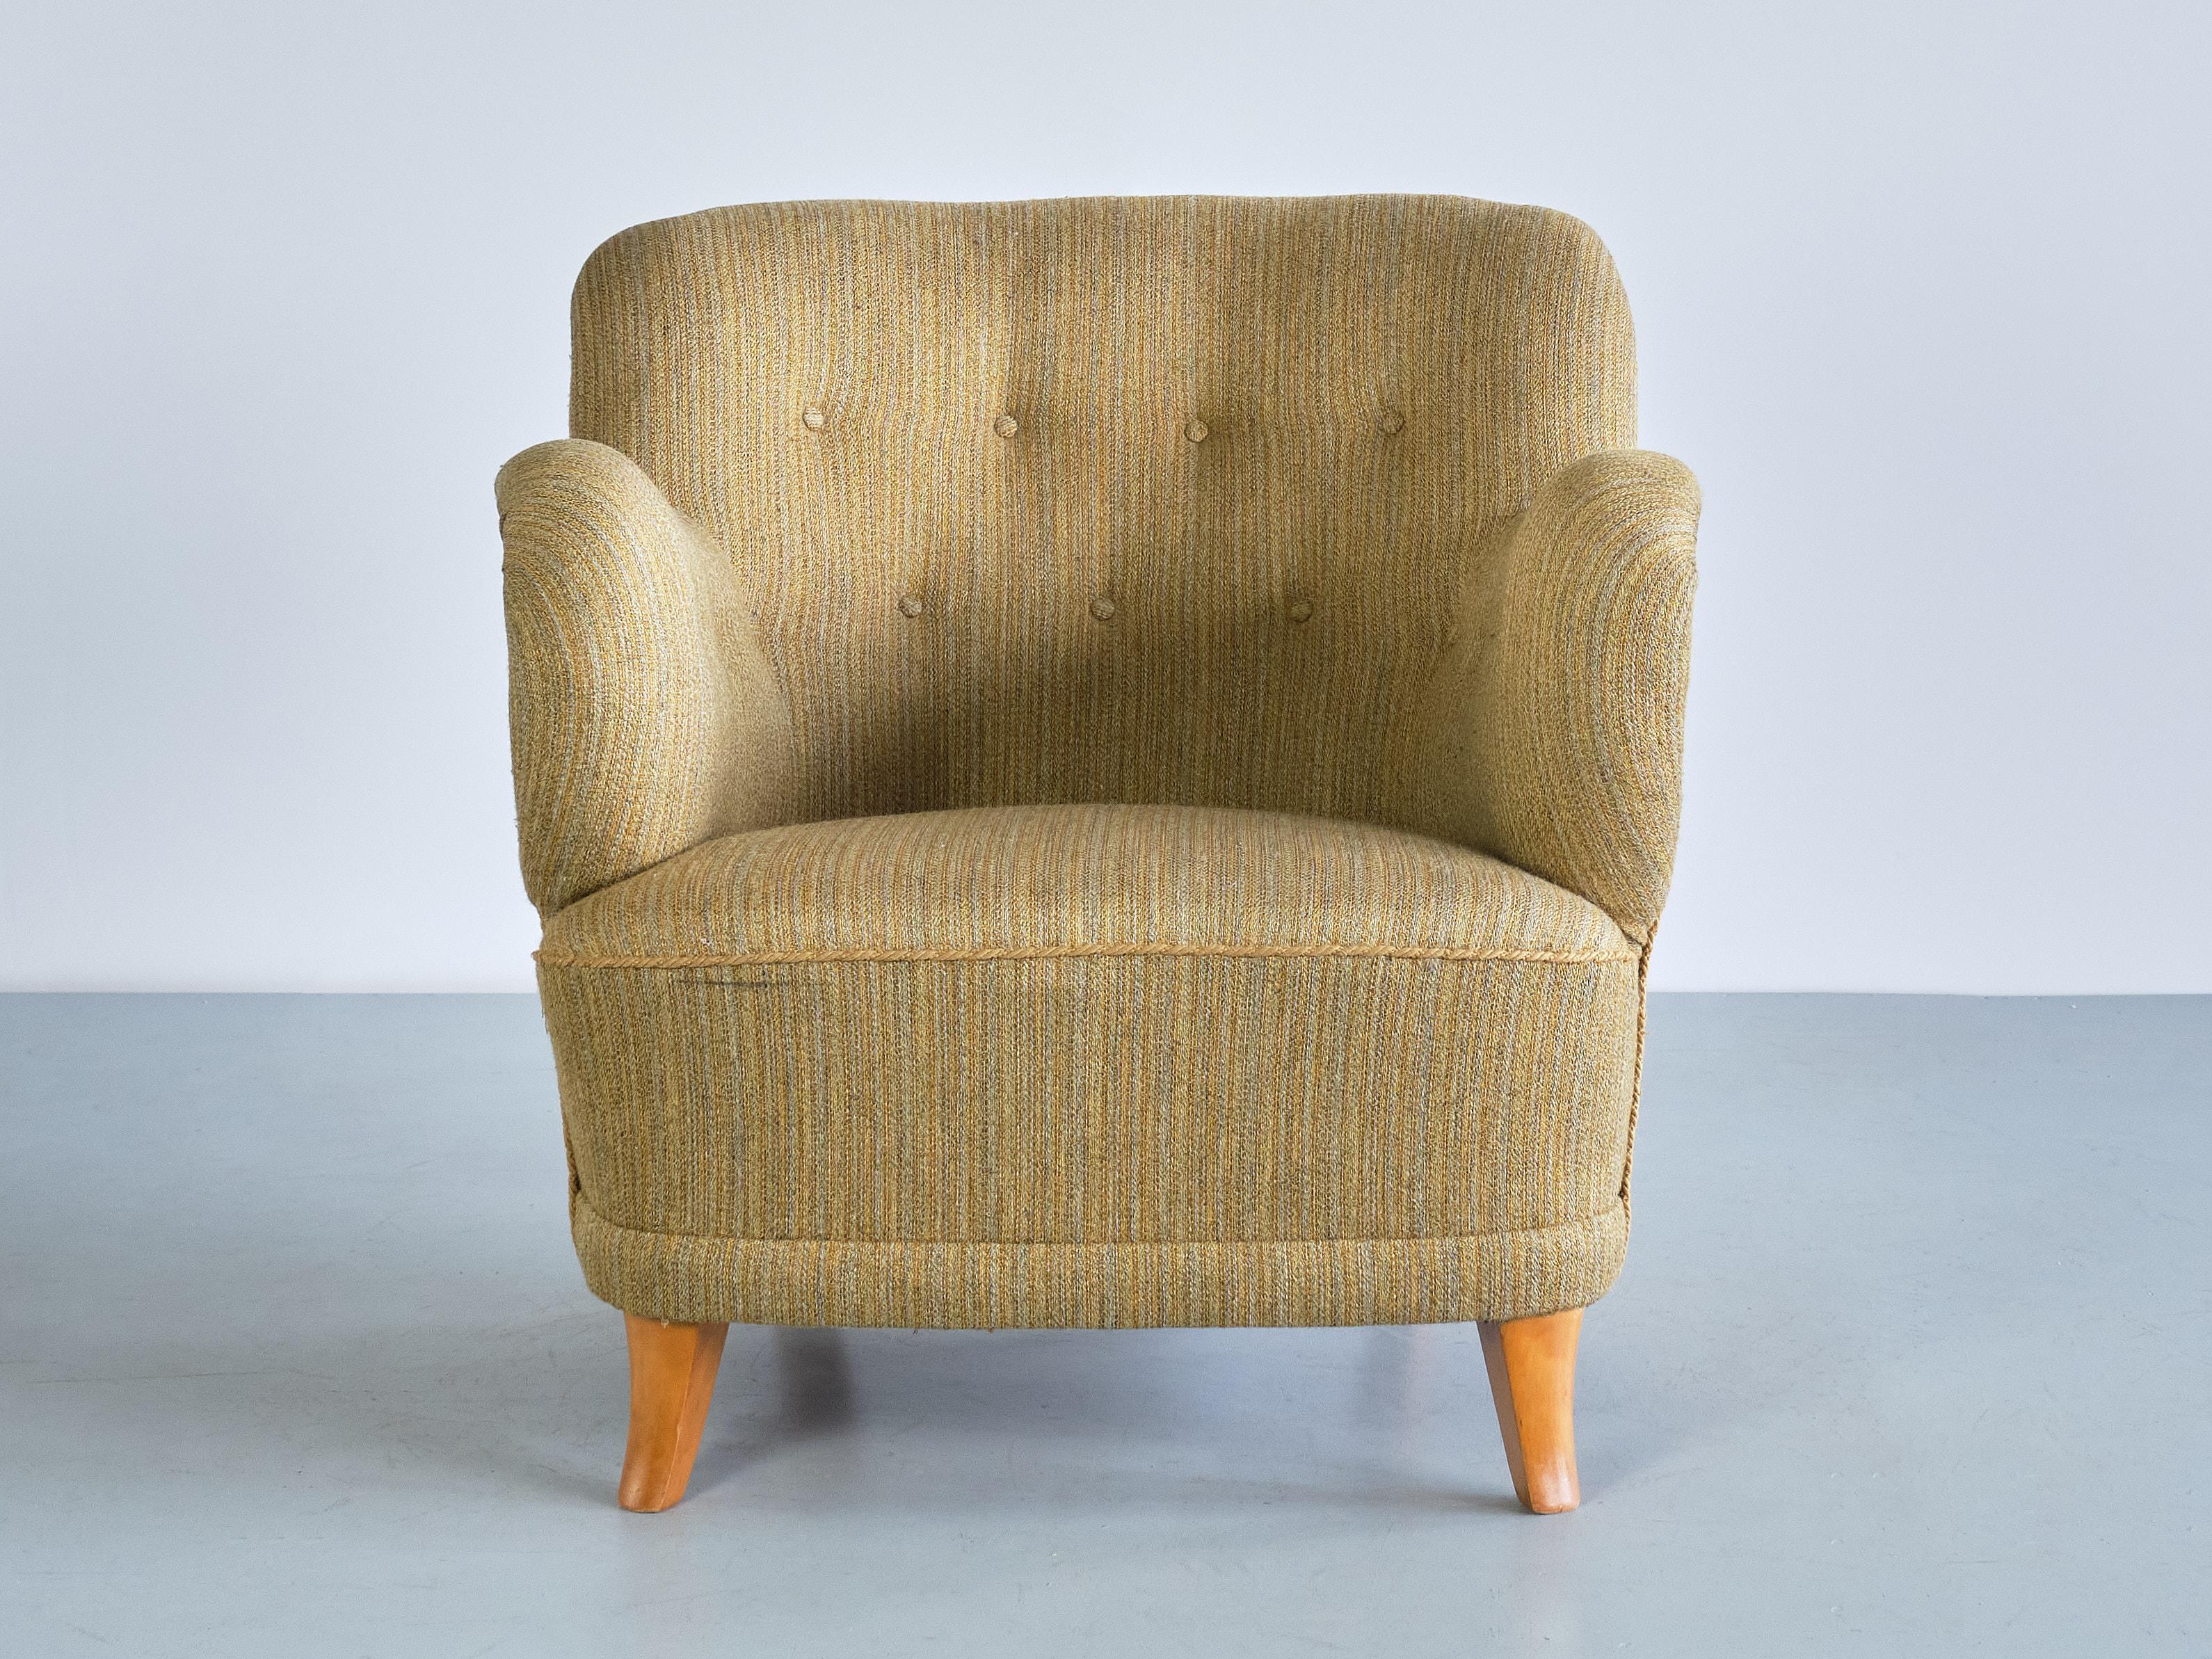 Swedish Sculptural Pair of Gustav Axel Berg Armchairs in Beech and Wool, Sweden, 1940s For Sale